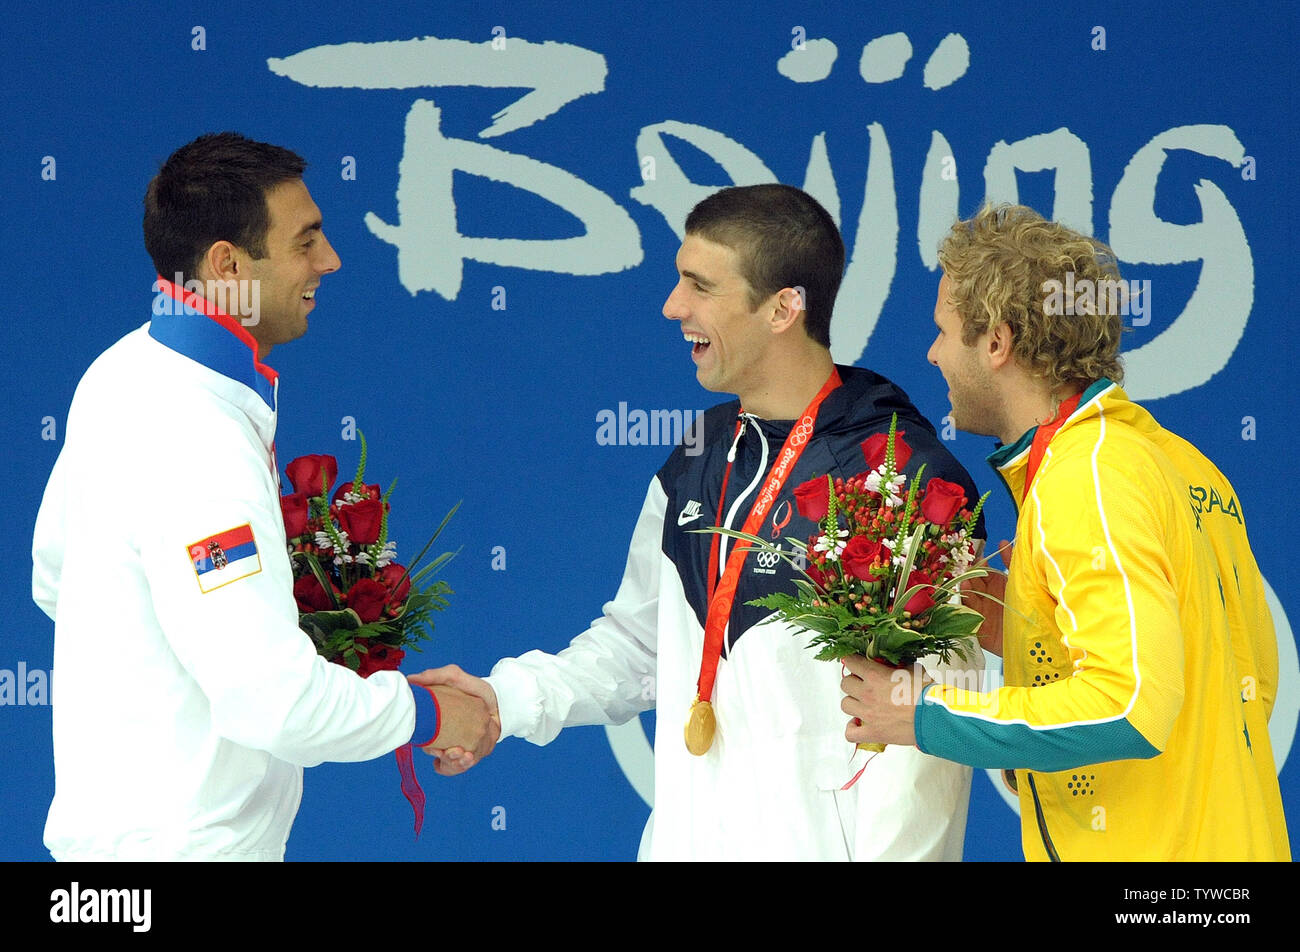 USA's Michael Phelps (gold) (C) shakes hands with Serbia's Milorad Cavic (silver) (L) as Australia's Andrew Lauterstein (bronze) looks on after they received their medals for the Men's 100M Butterfly final at the National Aquatic Center (Water Cube) during the 2008 Summer Olympics in Beijing, China, on August 16, 2008. Phelps is tied with Mark Spitz, the swimmer who set the record of 7 gold medals in a single Olympics in Munich, 1972.   (UPI Photo/Roger L. Wollenberg) Stock Photo